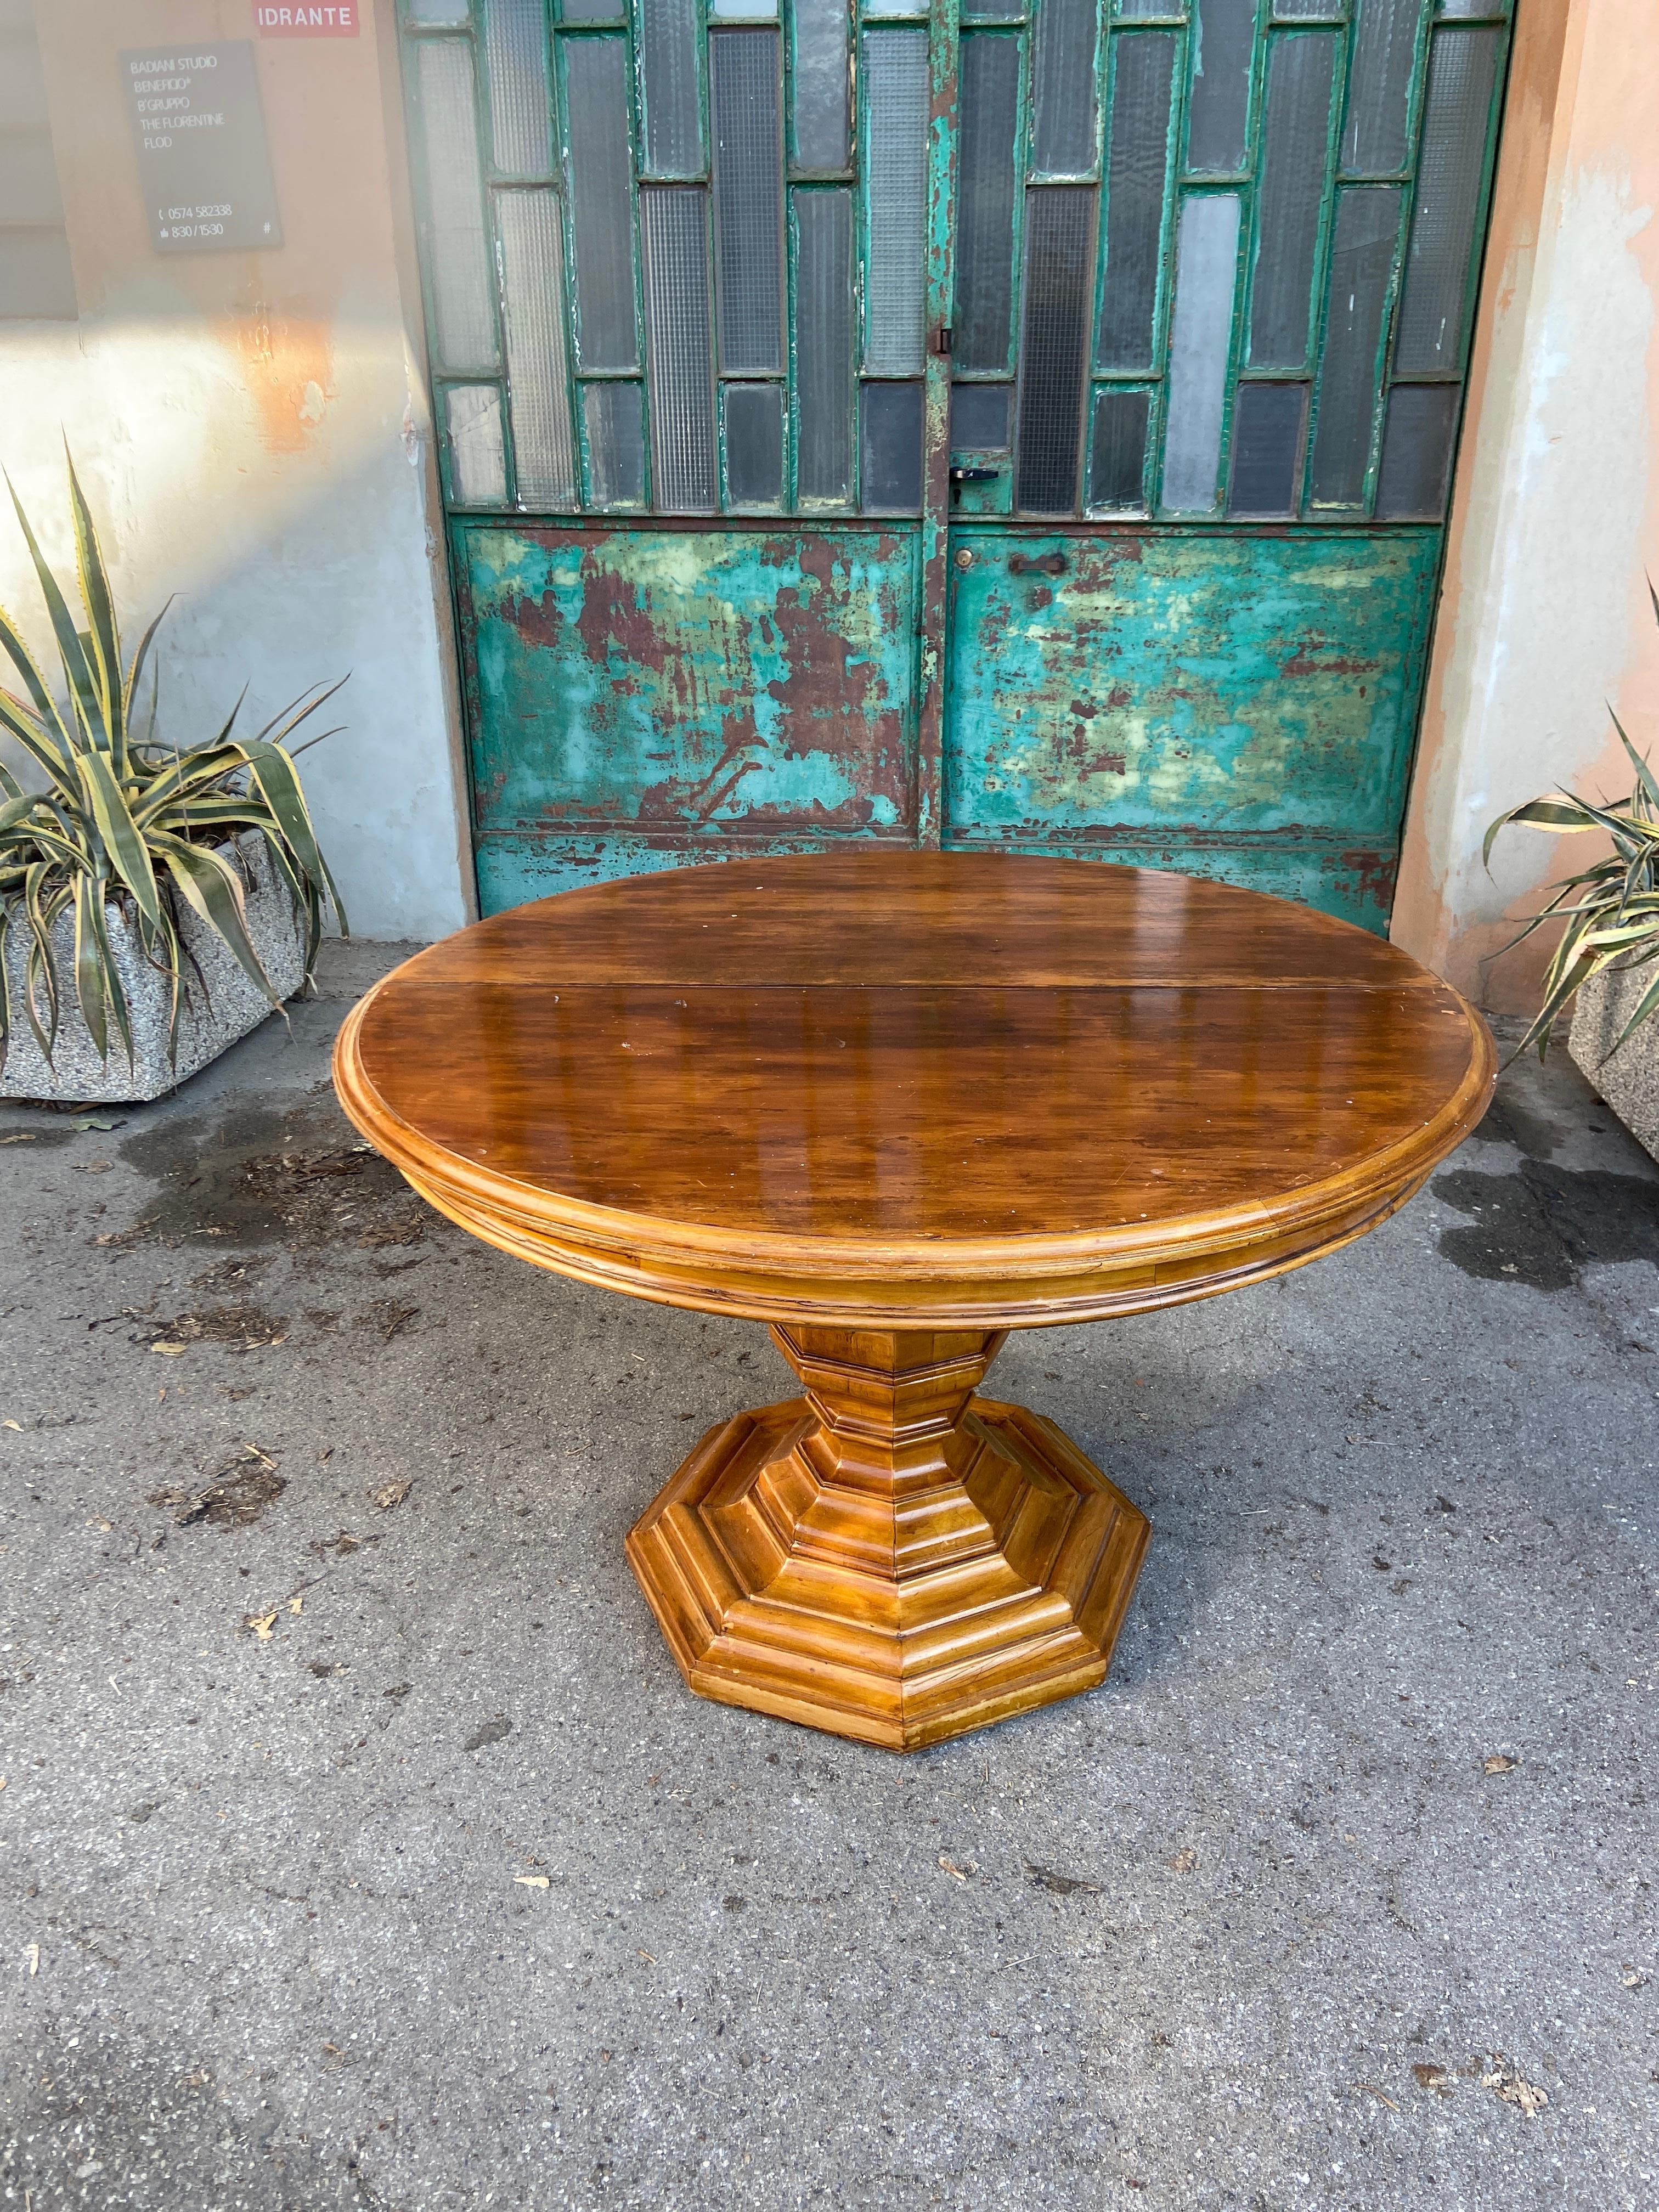 19th century Italian wooden octagonal shaped center or dining adjustable table. 1890
The table has two extensions (cm.30 each) which can be installed together or separately.
This particular comes with its original patina.